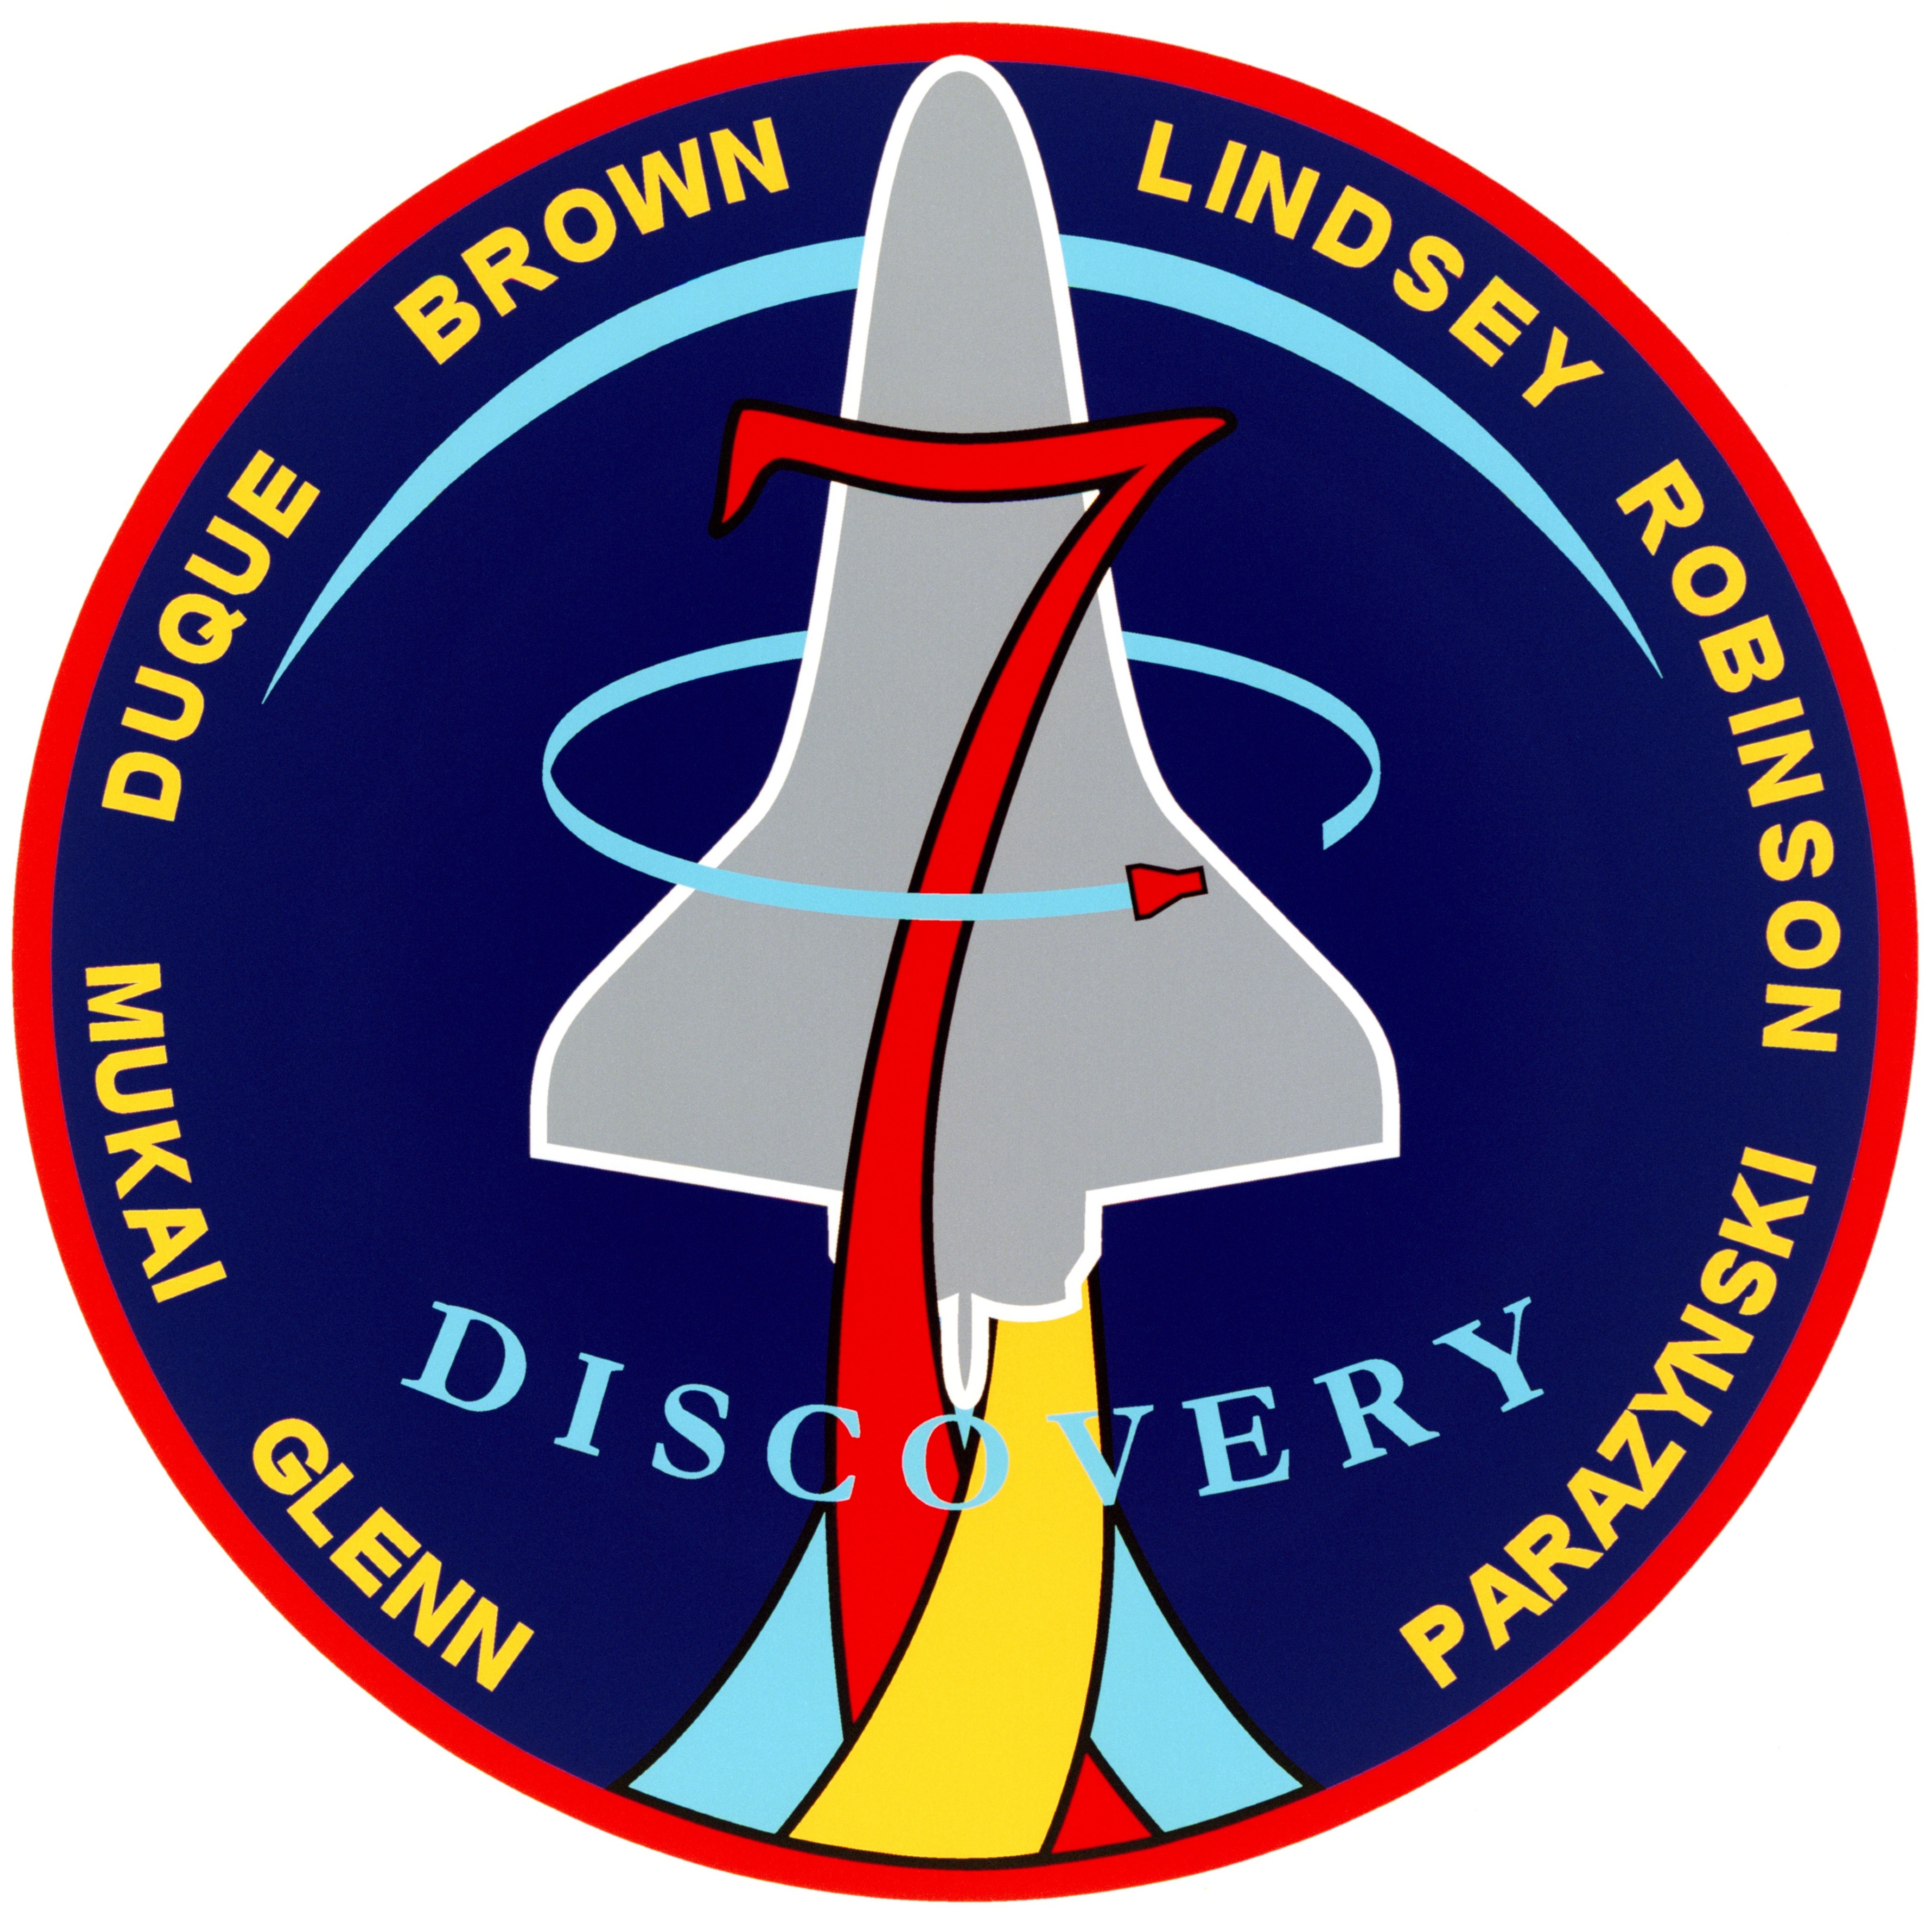 The STS-95 crew patch